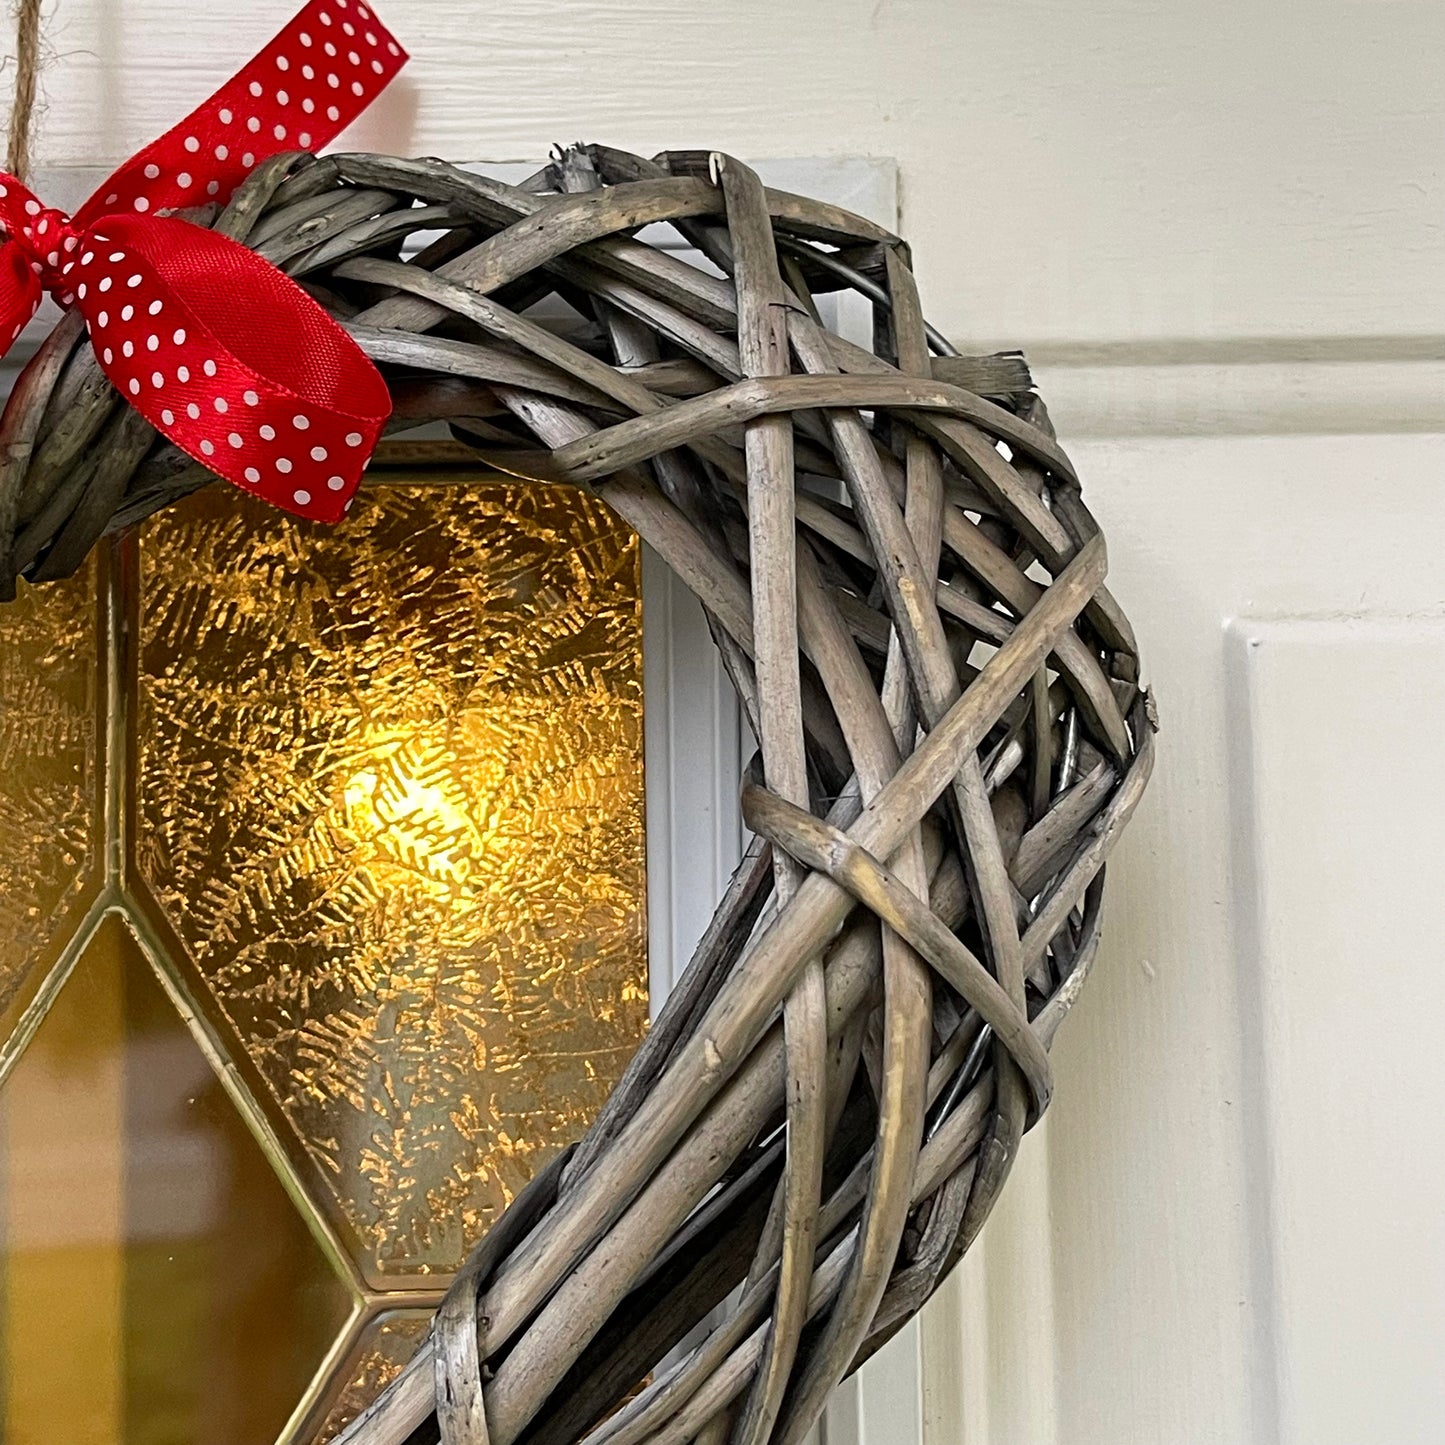 Wide Wicker Heart Wreath With Red Bow